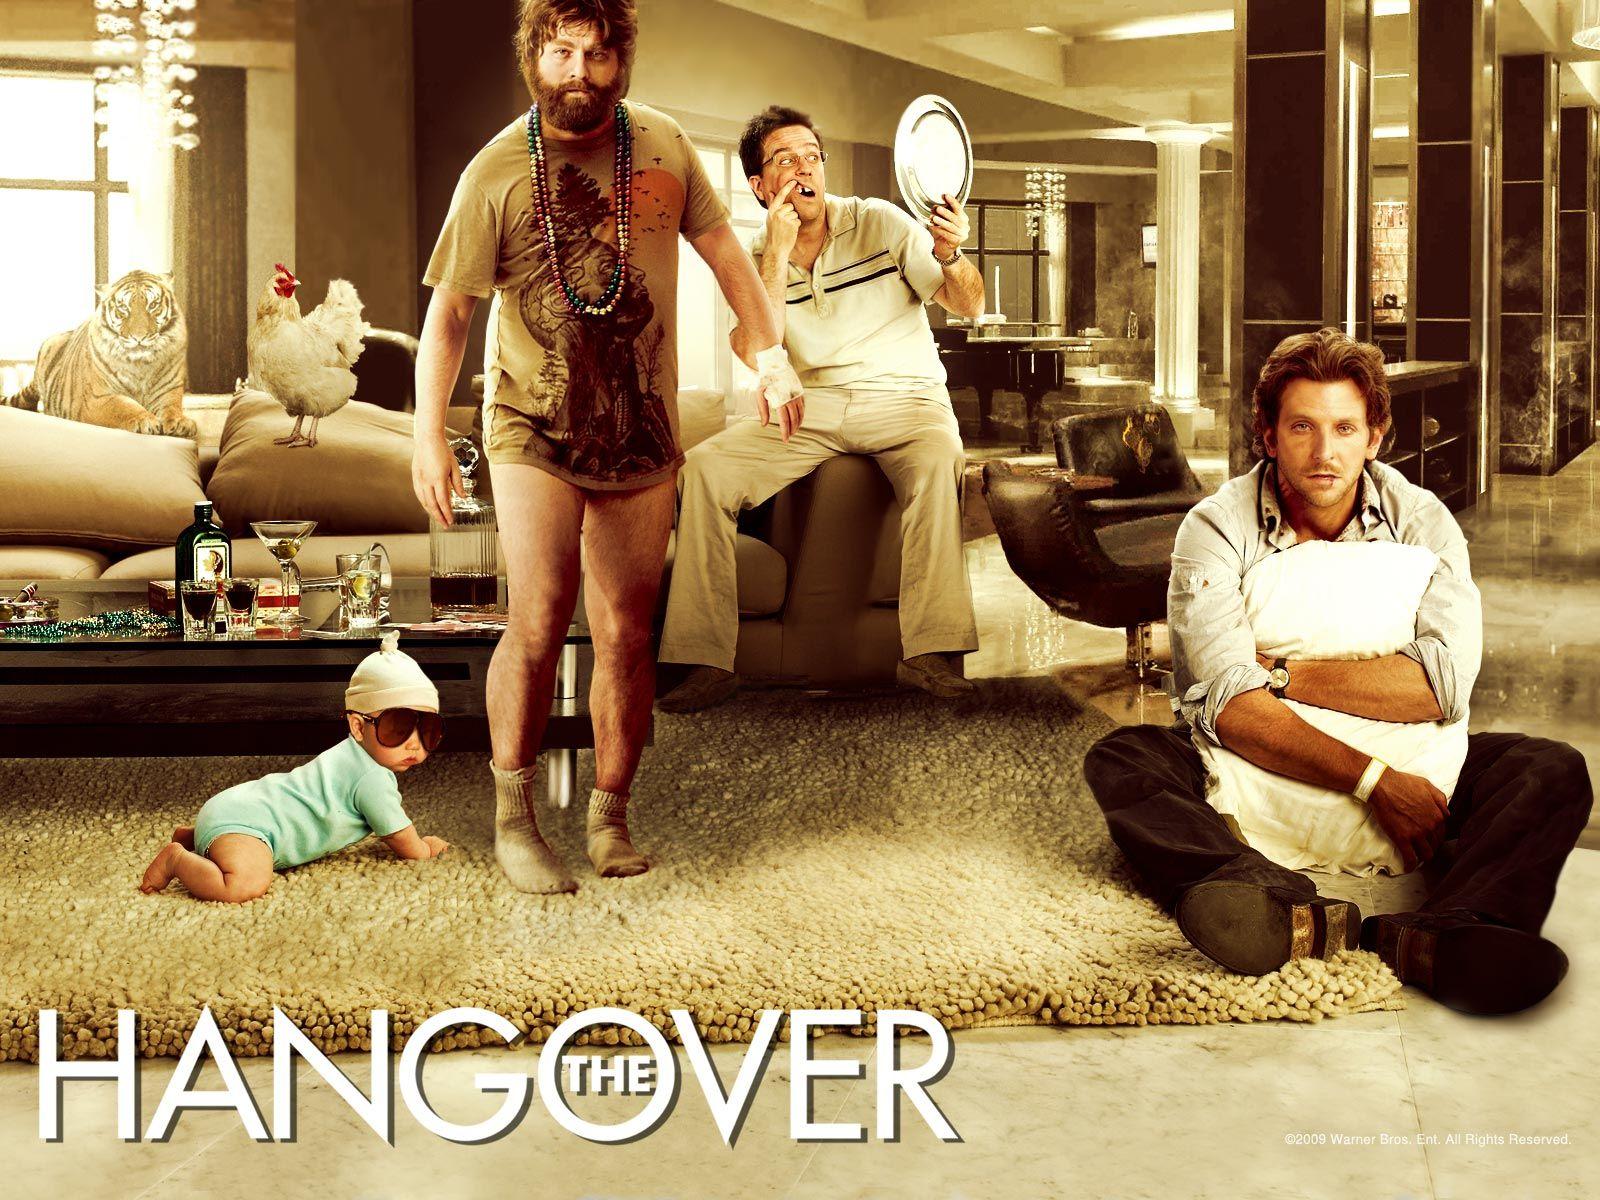 Wallpaper Tagged With HANGOVER. HANGOVER HD Wallpaper